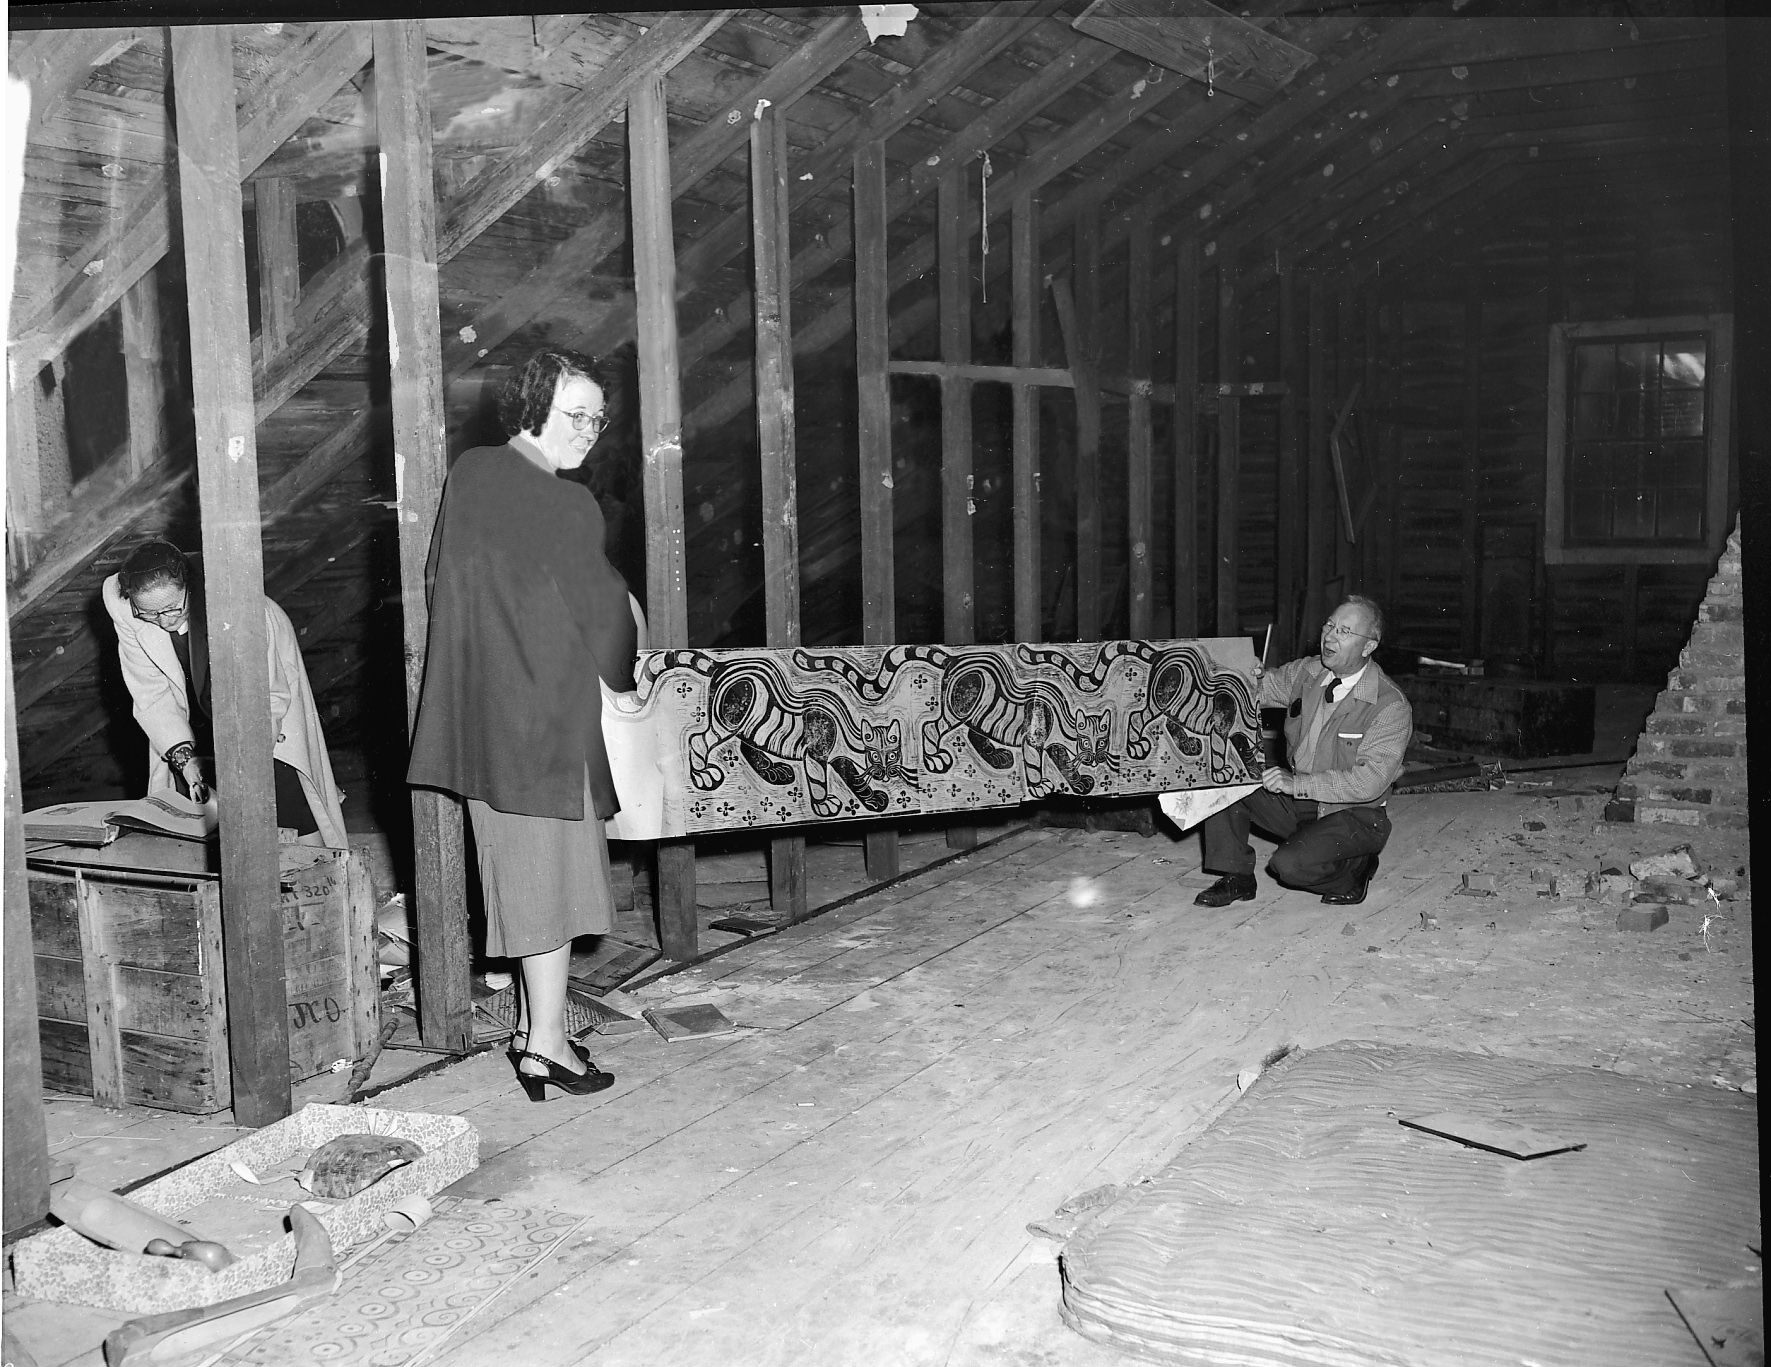 Ray Thompson and Ruthe M. Carr hold a Walter Anderson print in the unfinshed attic at Oldfields House, a National Historic Site in Mississippi. Originally published in Down South Magazine, this photograph was one of the many saved with the assistance of NEH grants. Image courtesy of Mississippi Gulf Coast Community College C.C. “Tex” Hamill Down South Magazine Collection.